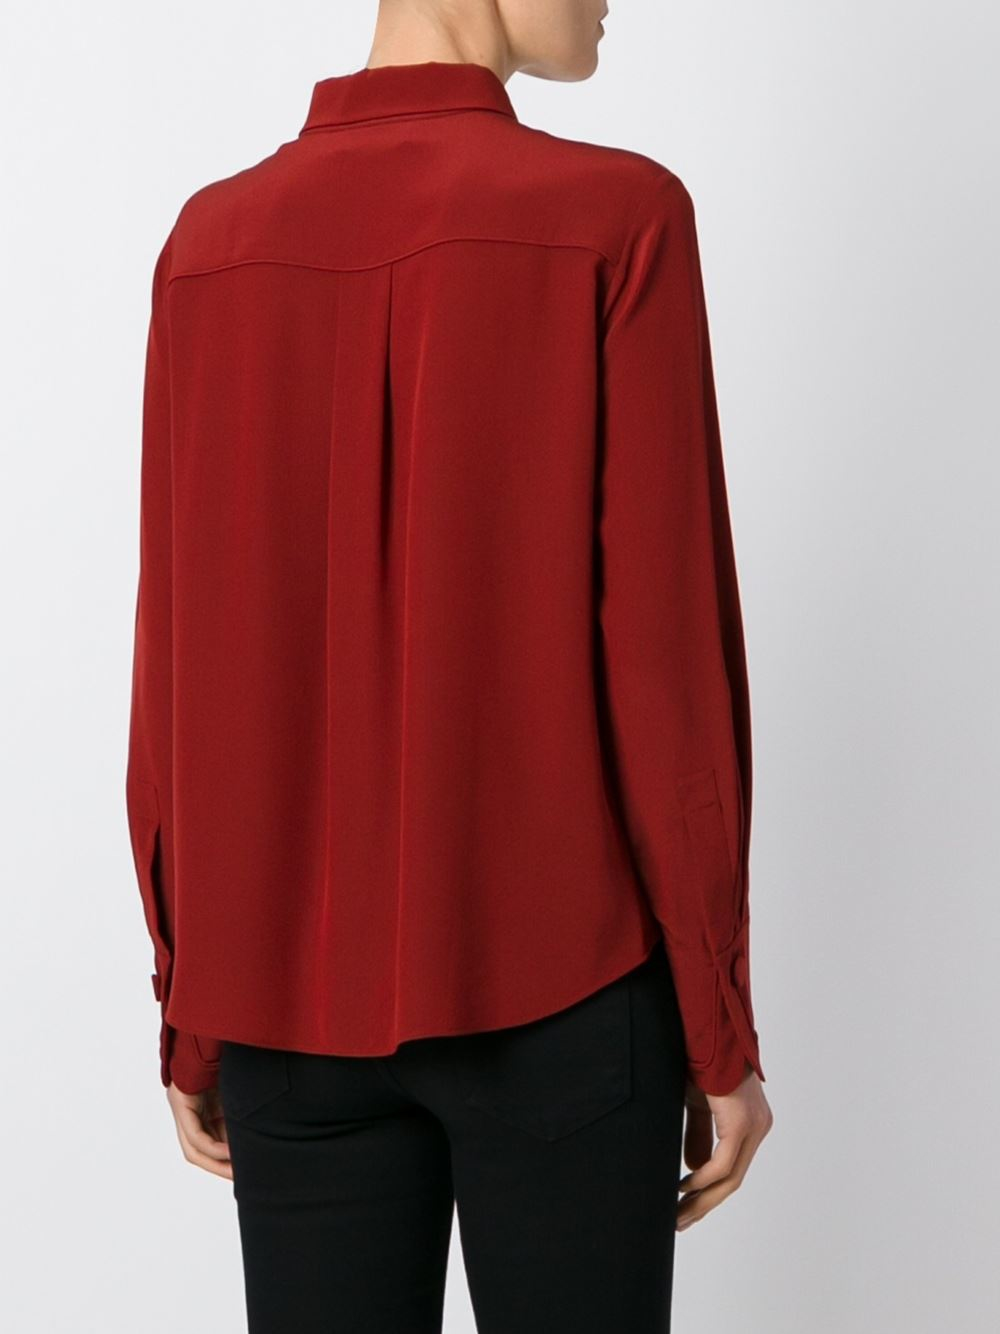 Chloé Concealed Placket Shirt | Lyst